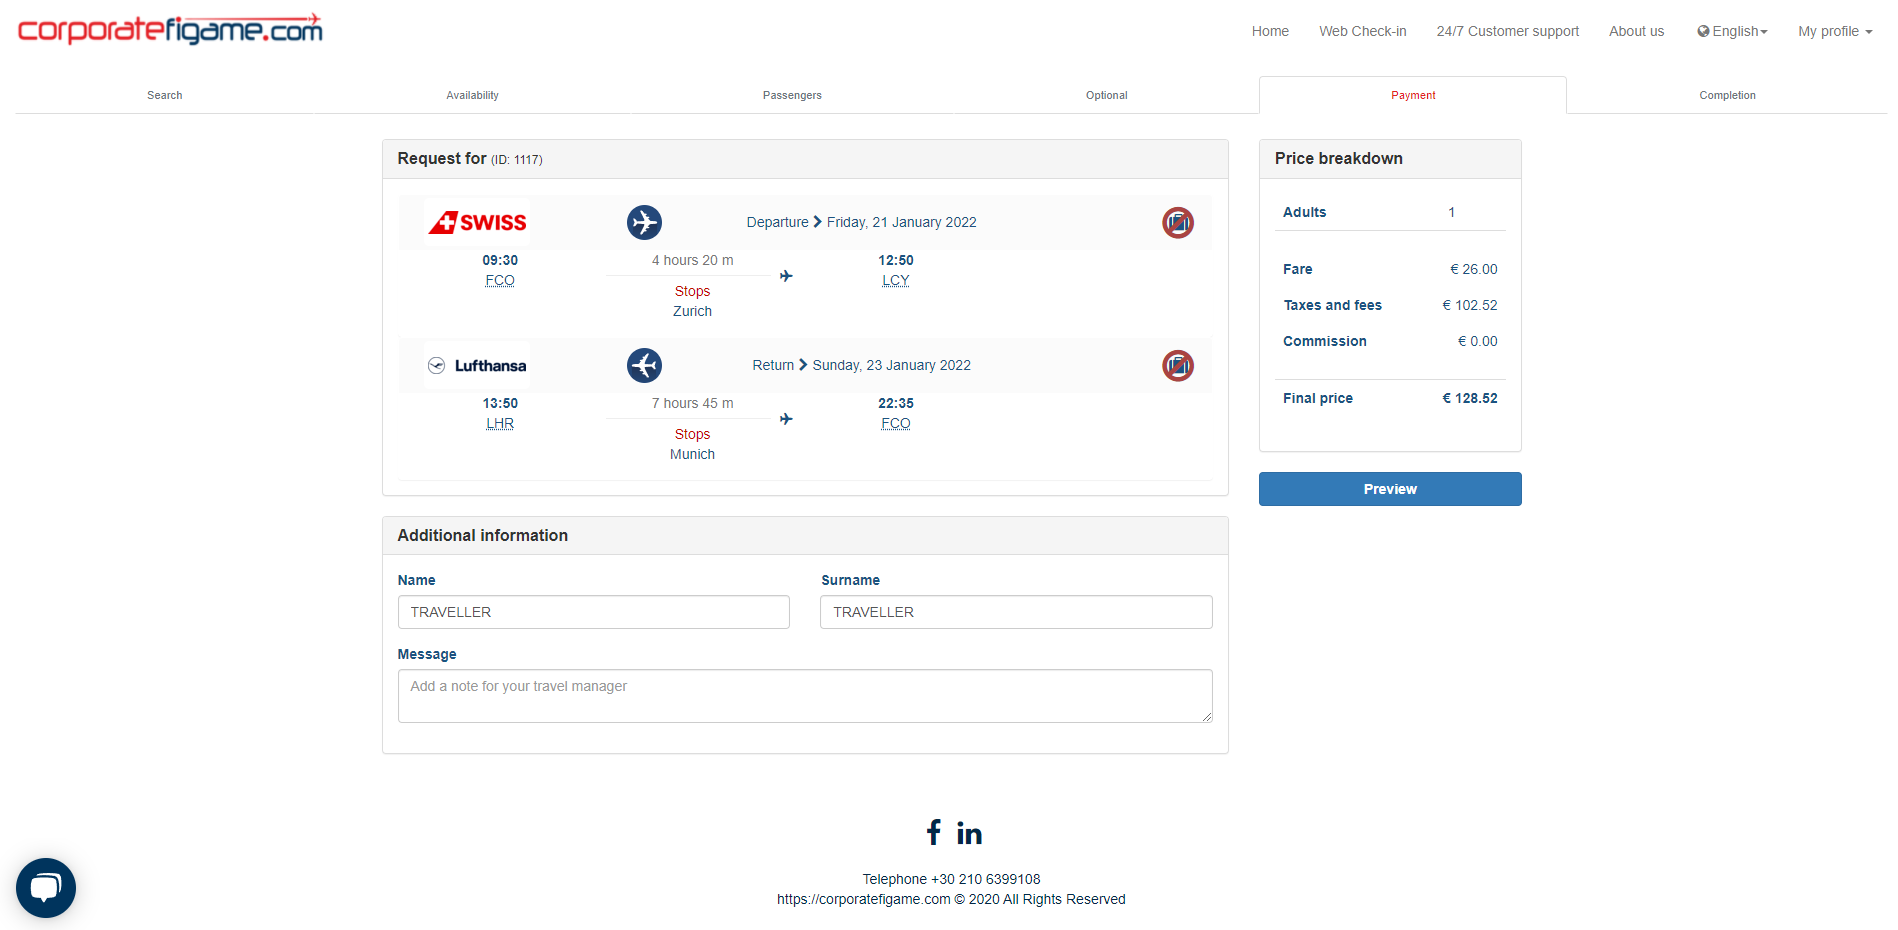 flight approval page for traveller in corporatefigame.com